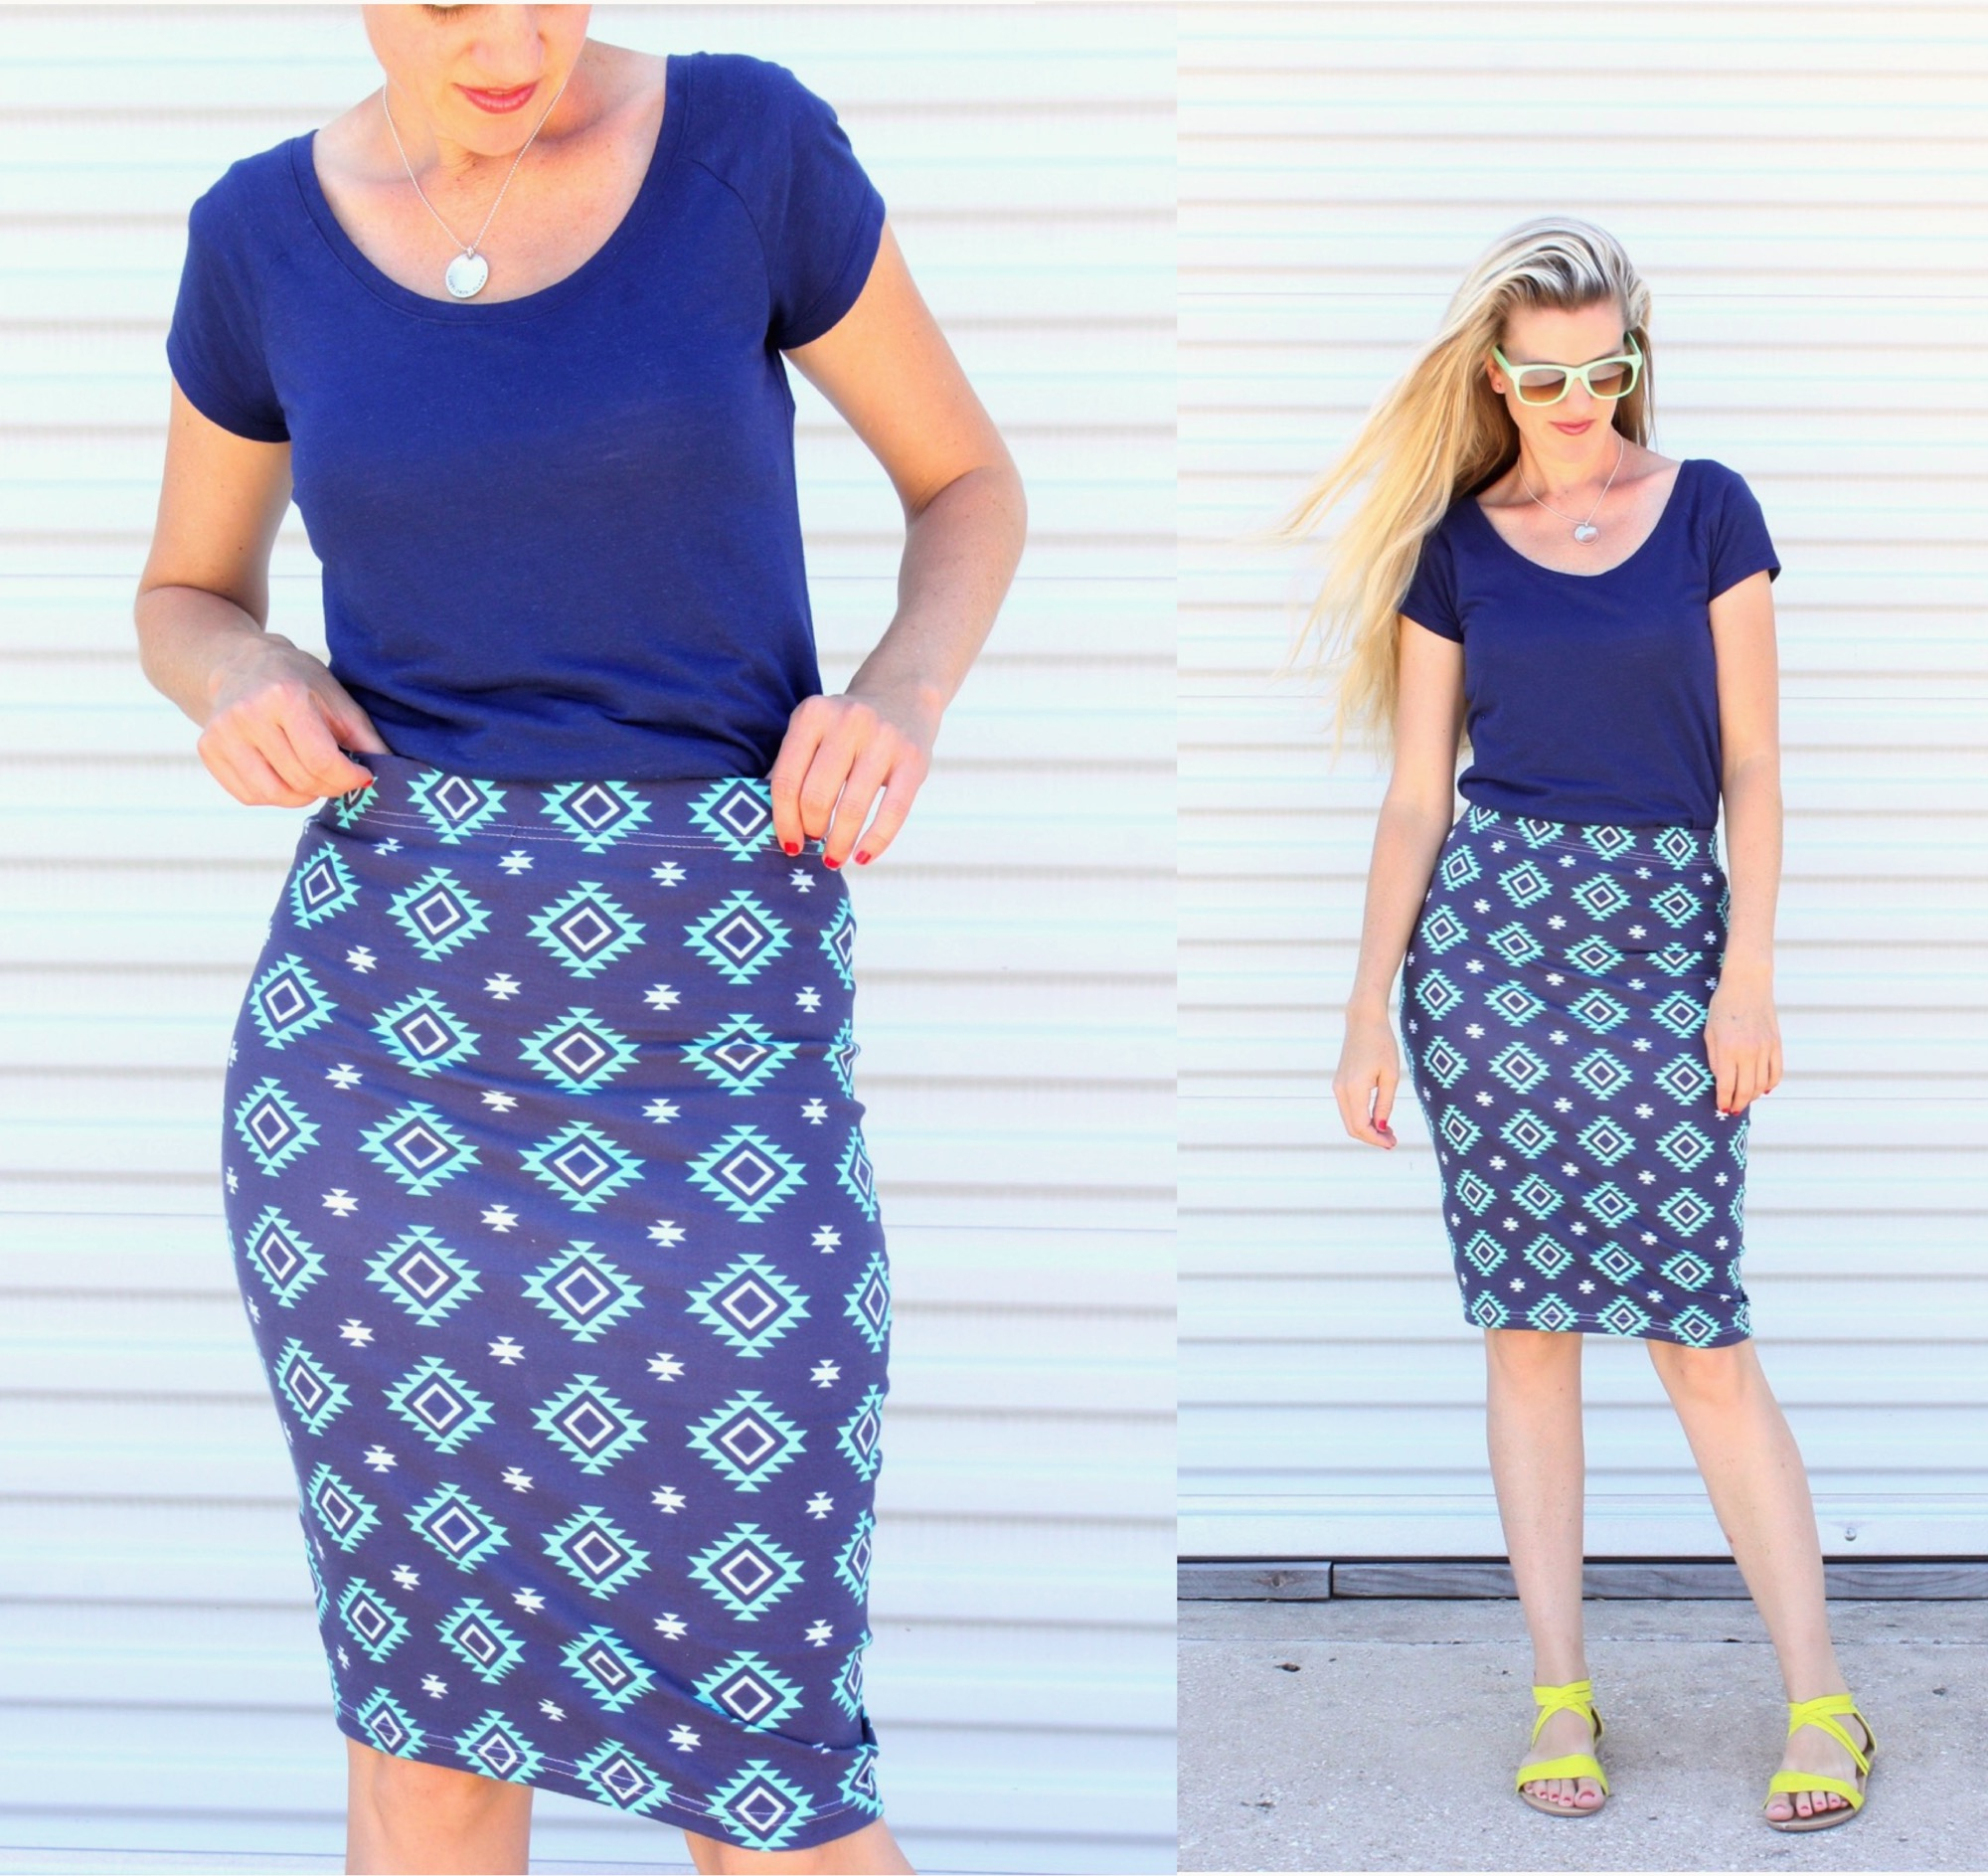 Jersey Knit Skirt Pattern My New Pencil Skirt 60 Skirts For Girls In Foster Care Made Everyday